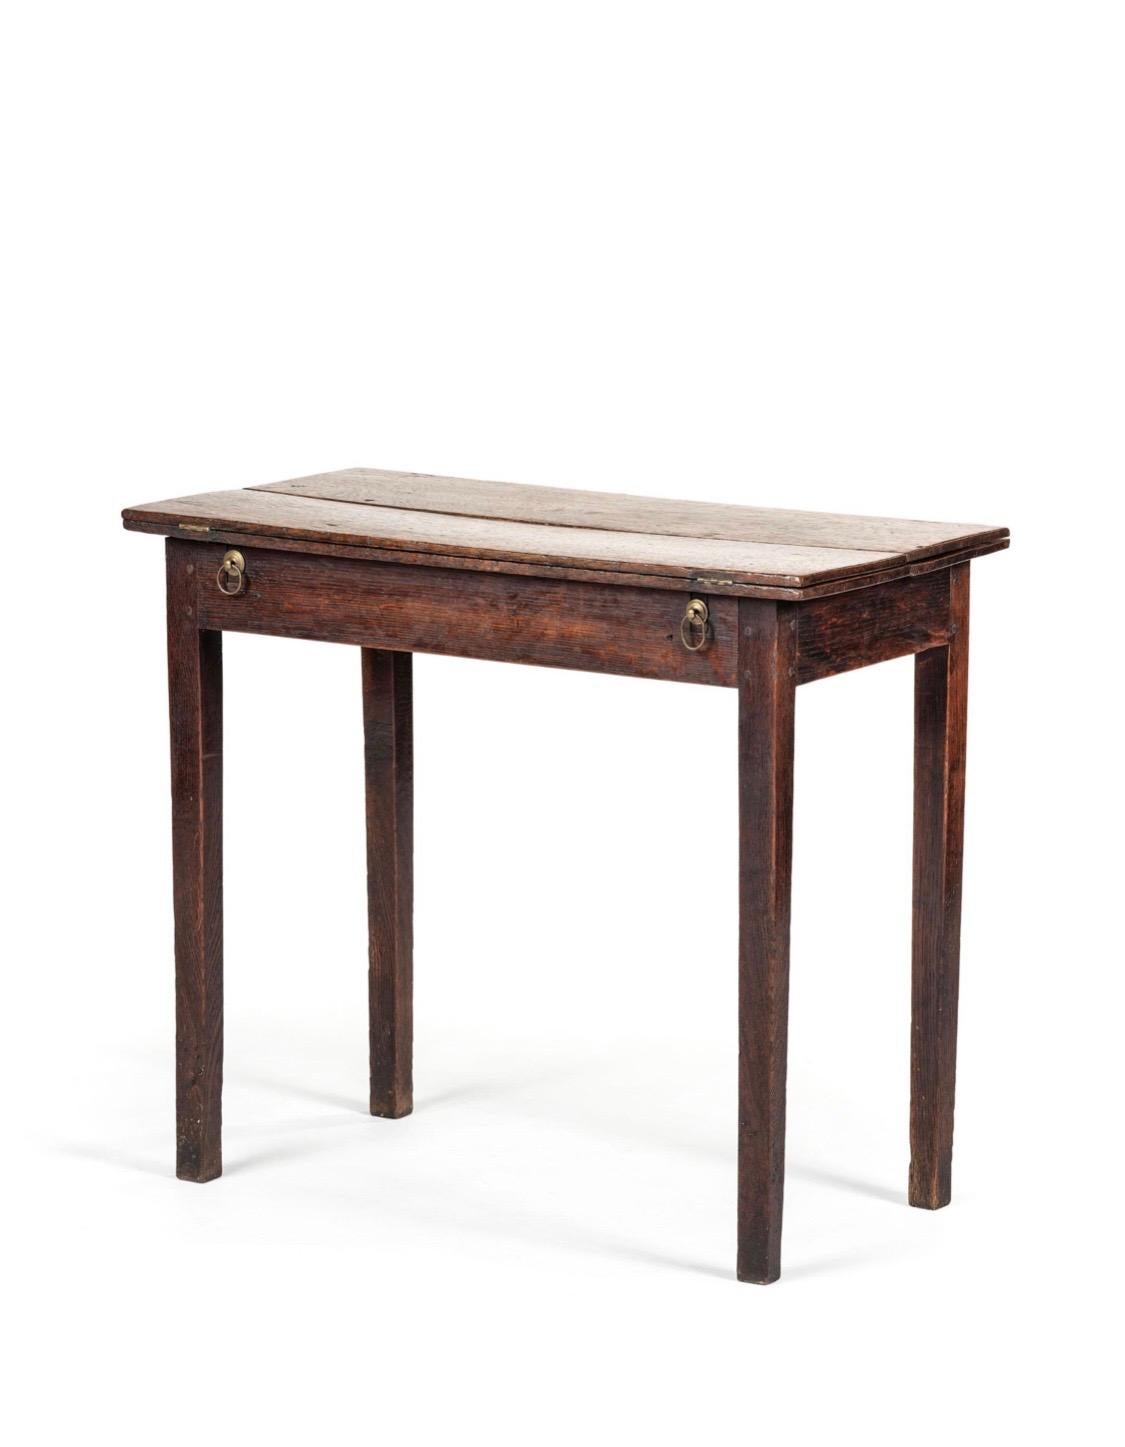 George III oak writing table, 18th Century
A small and simple rectangular table with folding top. Two arms pull out and each side of table to hold opened tops on either side. 
Slight warp and bow. Wear to surface and legs. Structrually